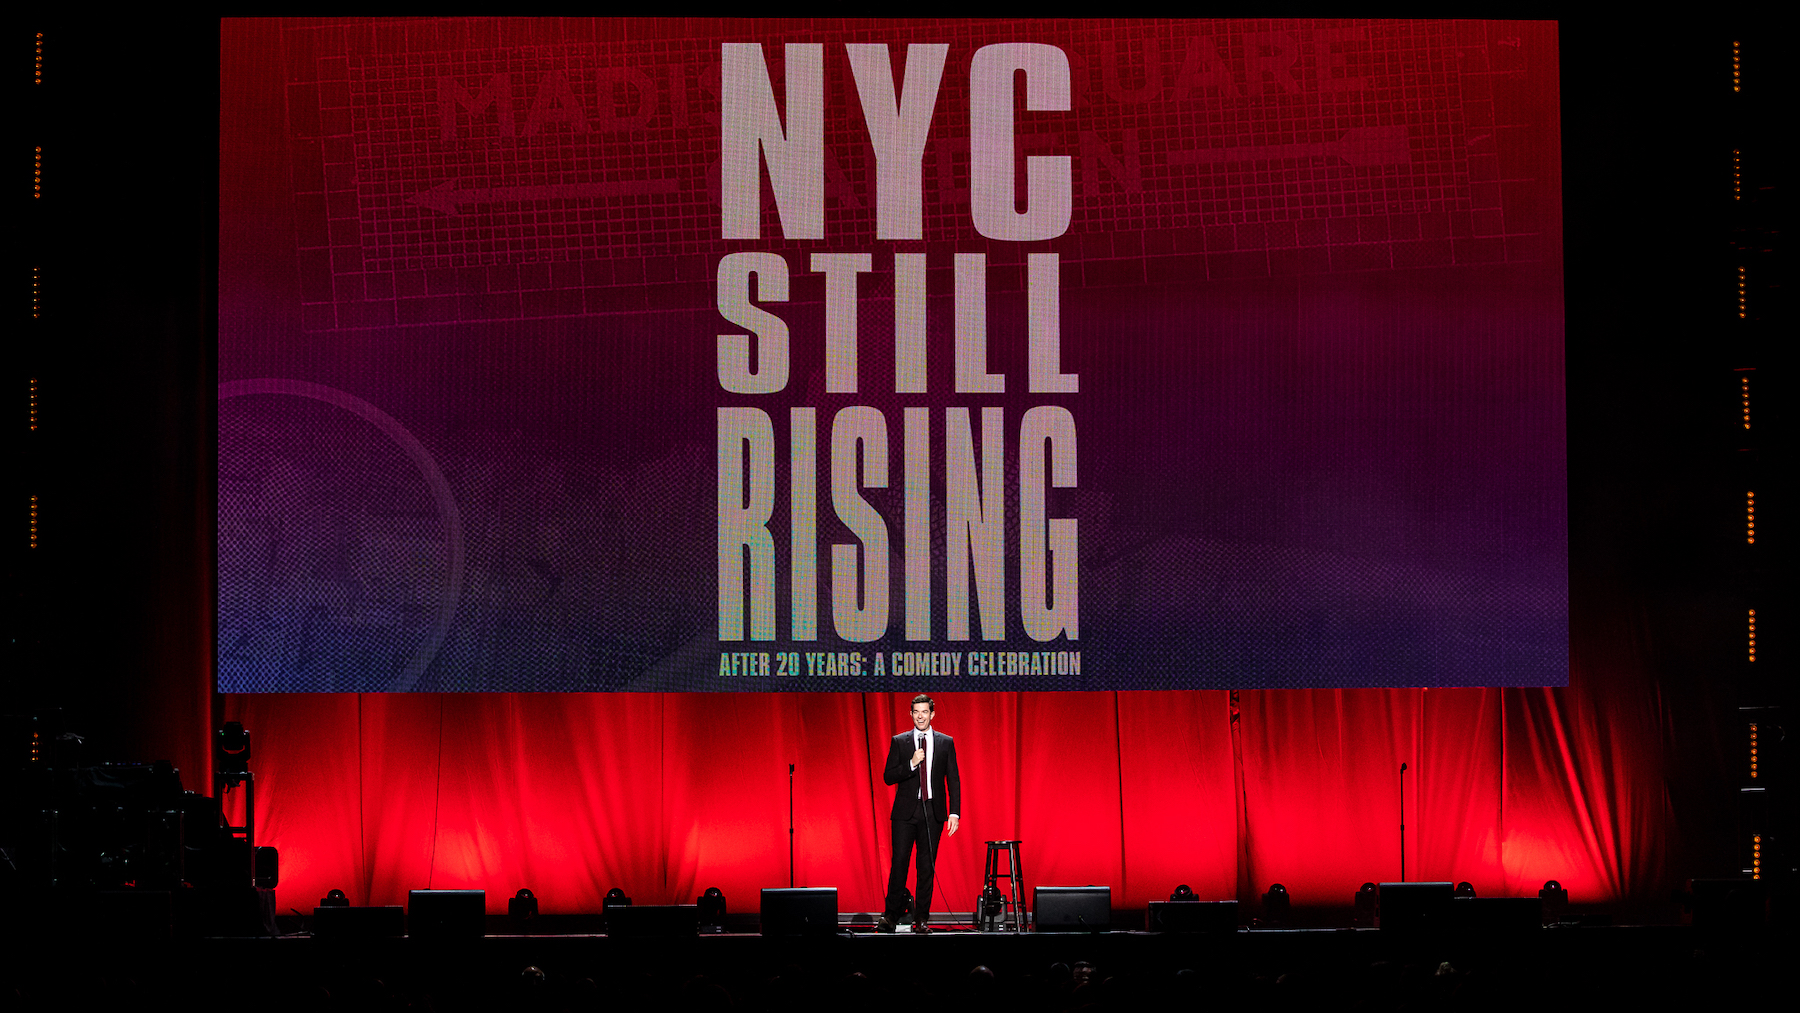 Photo 11 in 'NYC STILL RISING After 20 years:  A Comedy Celebration' gallery showcasing lighting design by Mike Baldassari of Mike-O-Matic Industries LLC